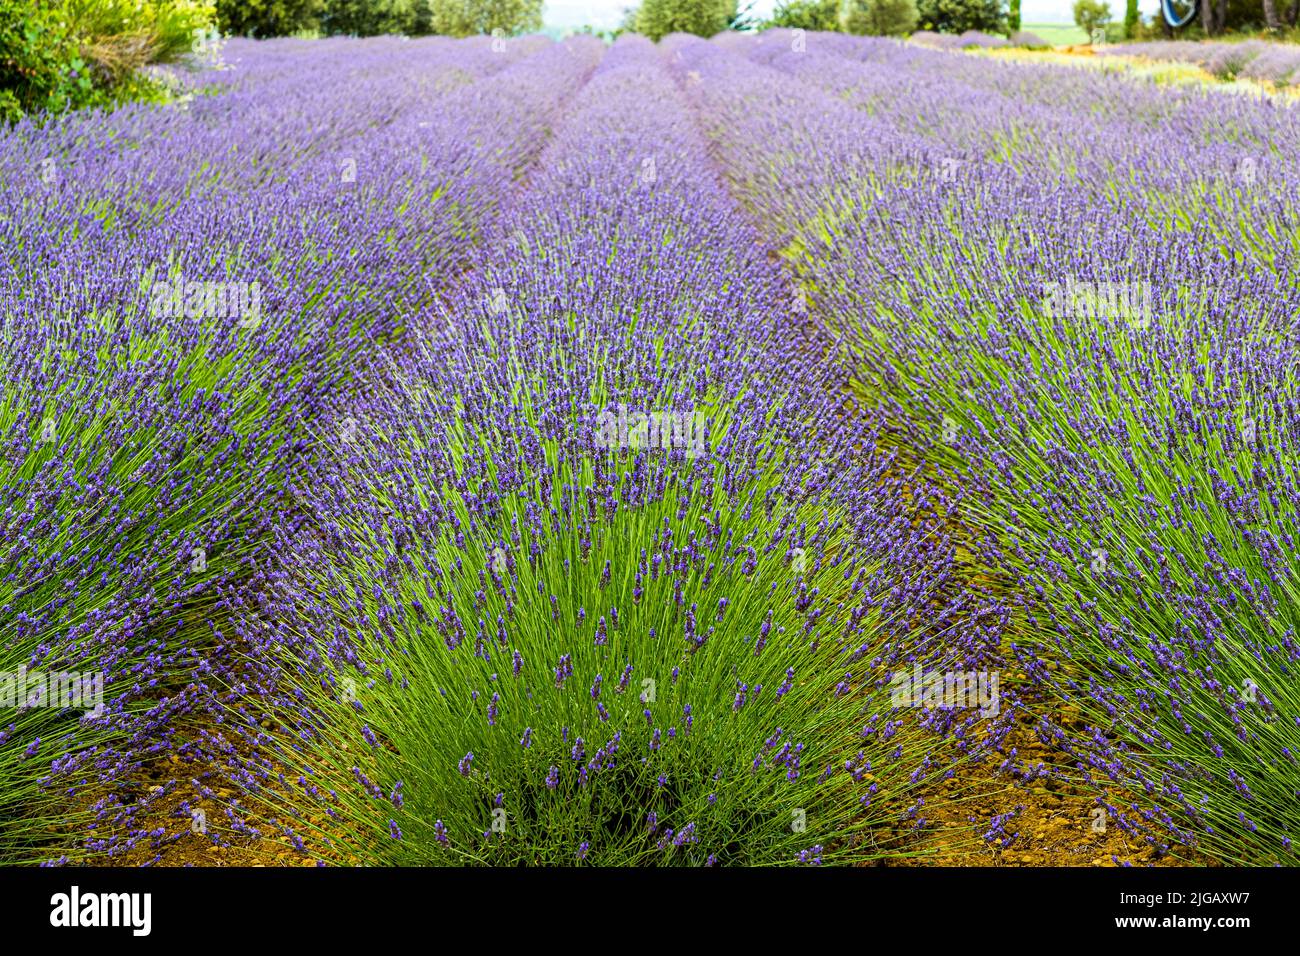 Lavender field in Gignac, France. Strictly speaking, this is a lavandin field. Lavandin is a hybrid lavender from a cross between the spirea lavender (Lavandula latifolia) and the true lavender (Lavandula angustifolia). This hybrid was not created by man, but accidentally by insect pollination, and was first discovered in 1930. Lavandin is more productive and therefore gradually displaces the true lavender from cultivation Stock Photo